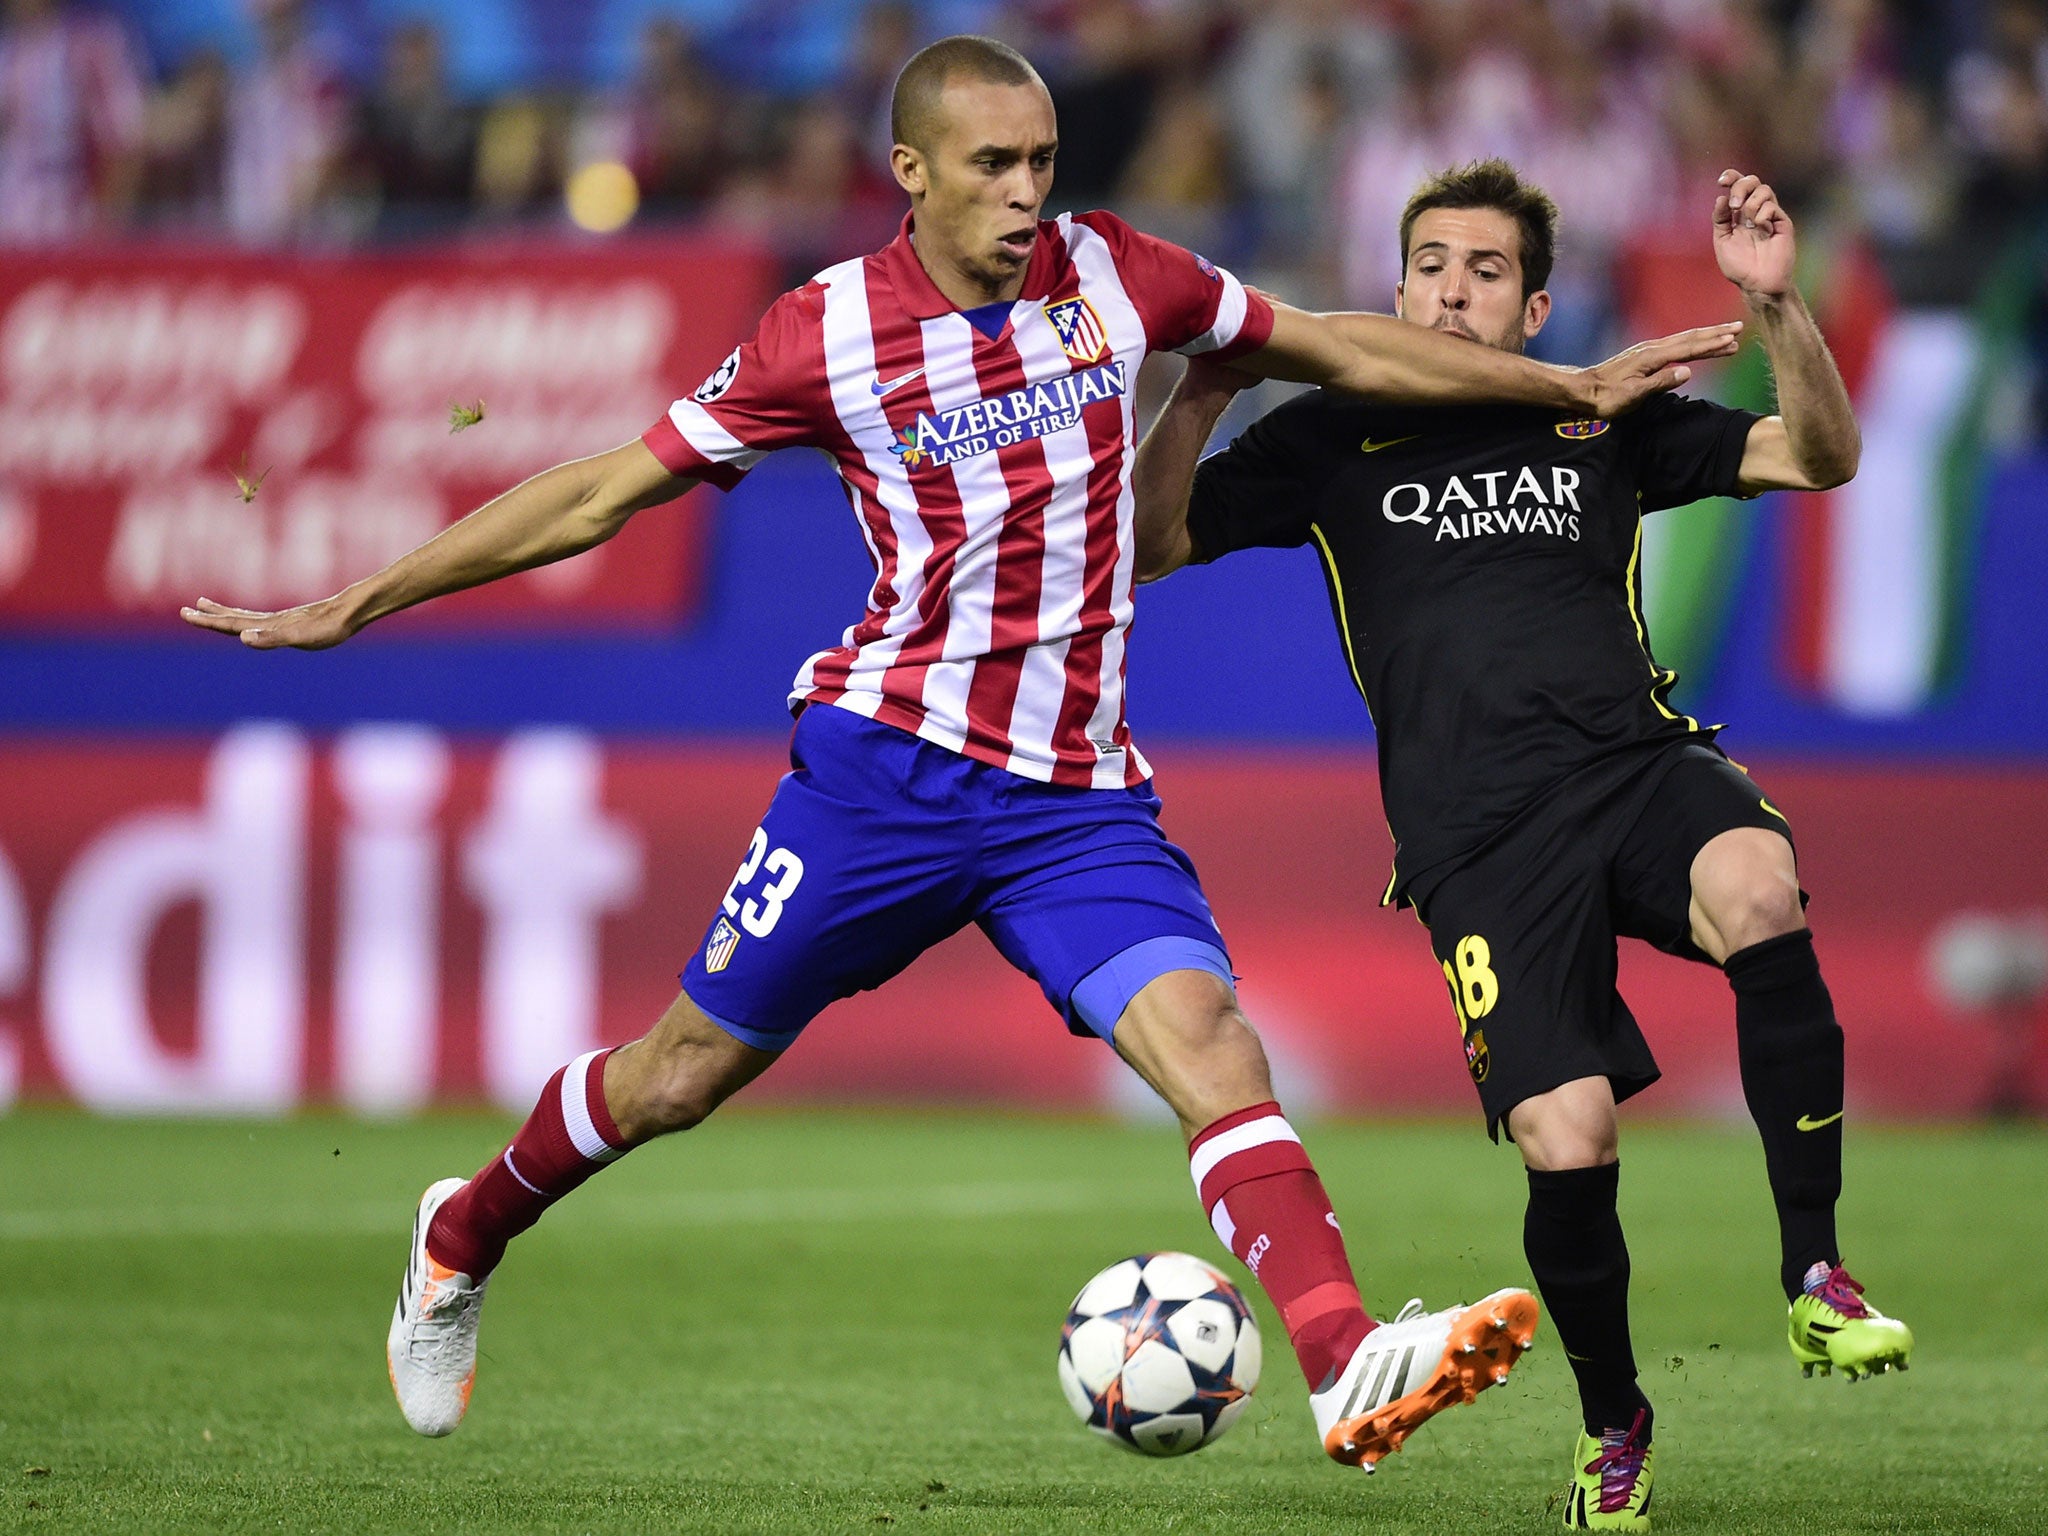 Atletico Madrid defender Joao Miranda is a reported transfer target for Chelsea